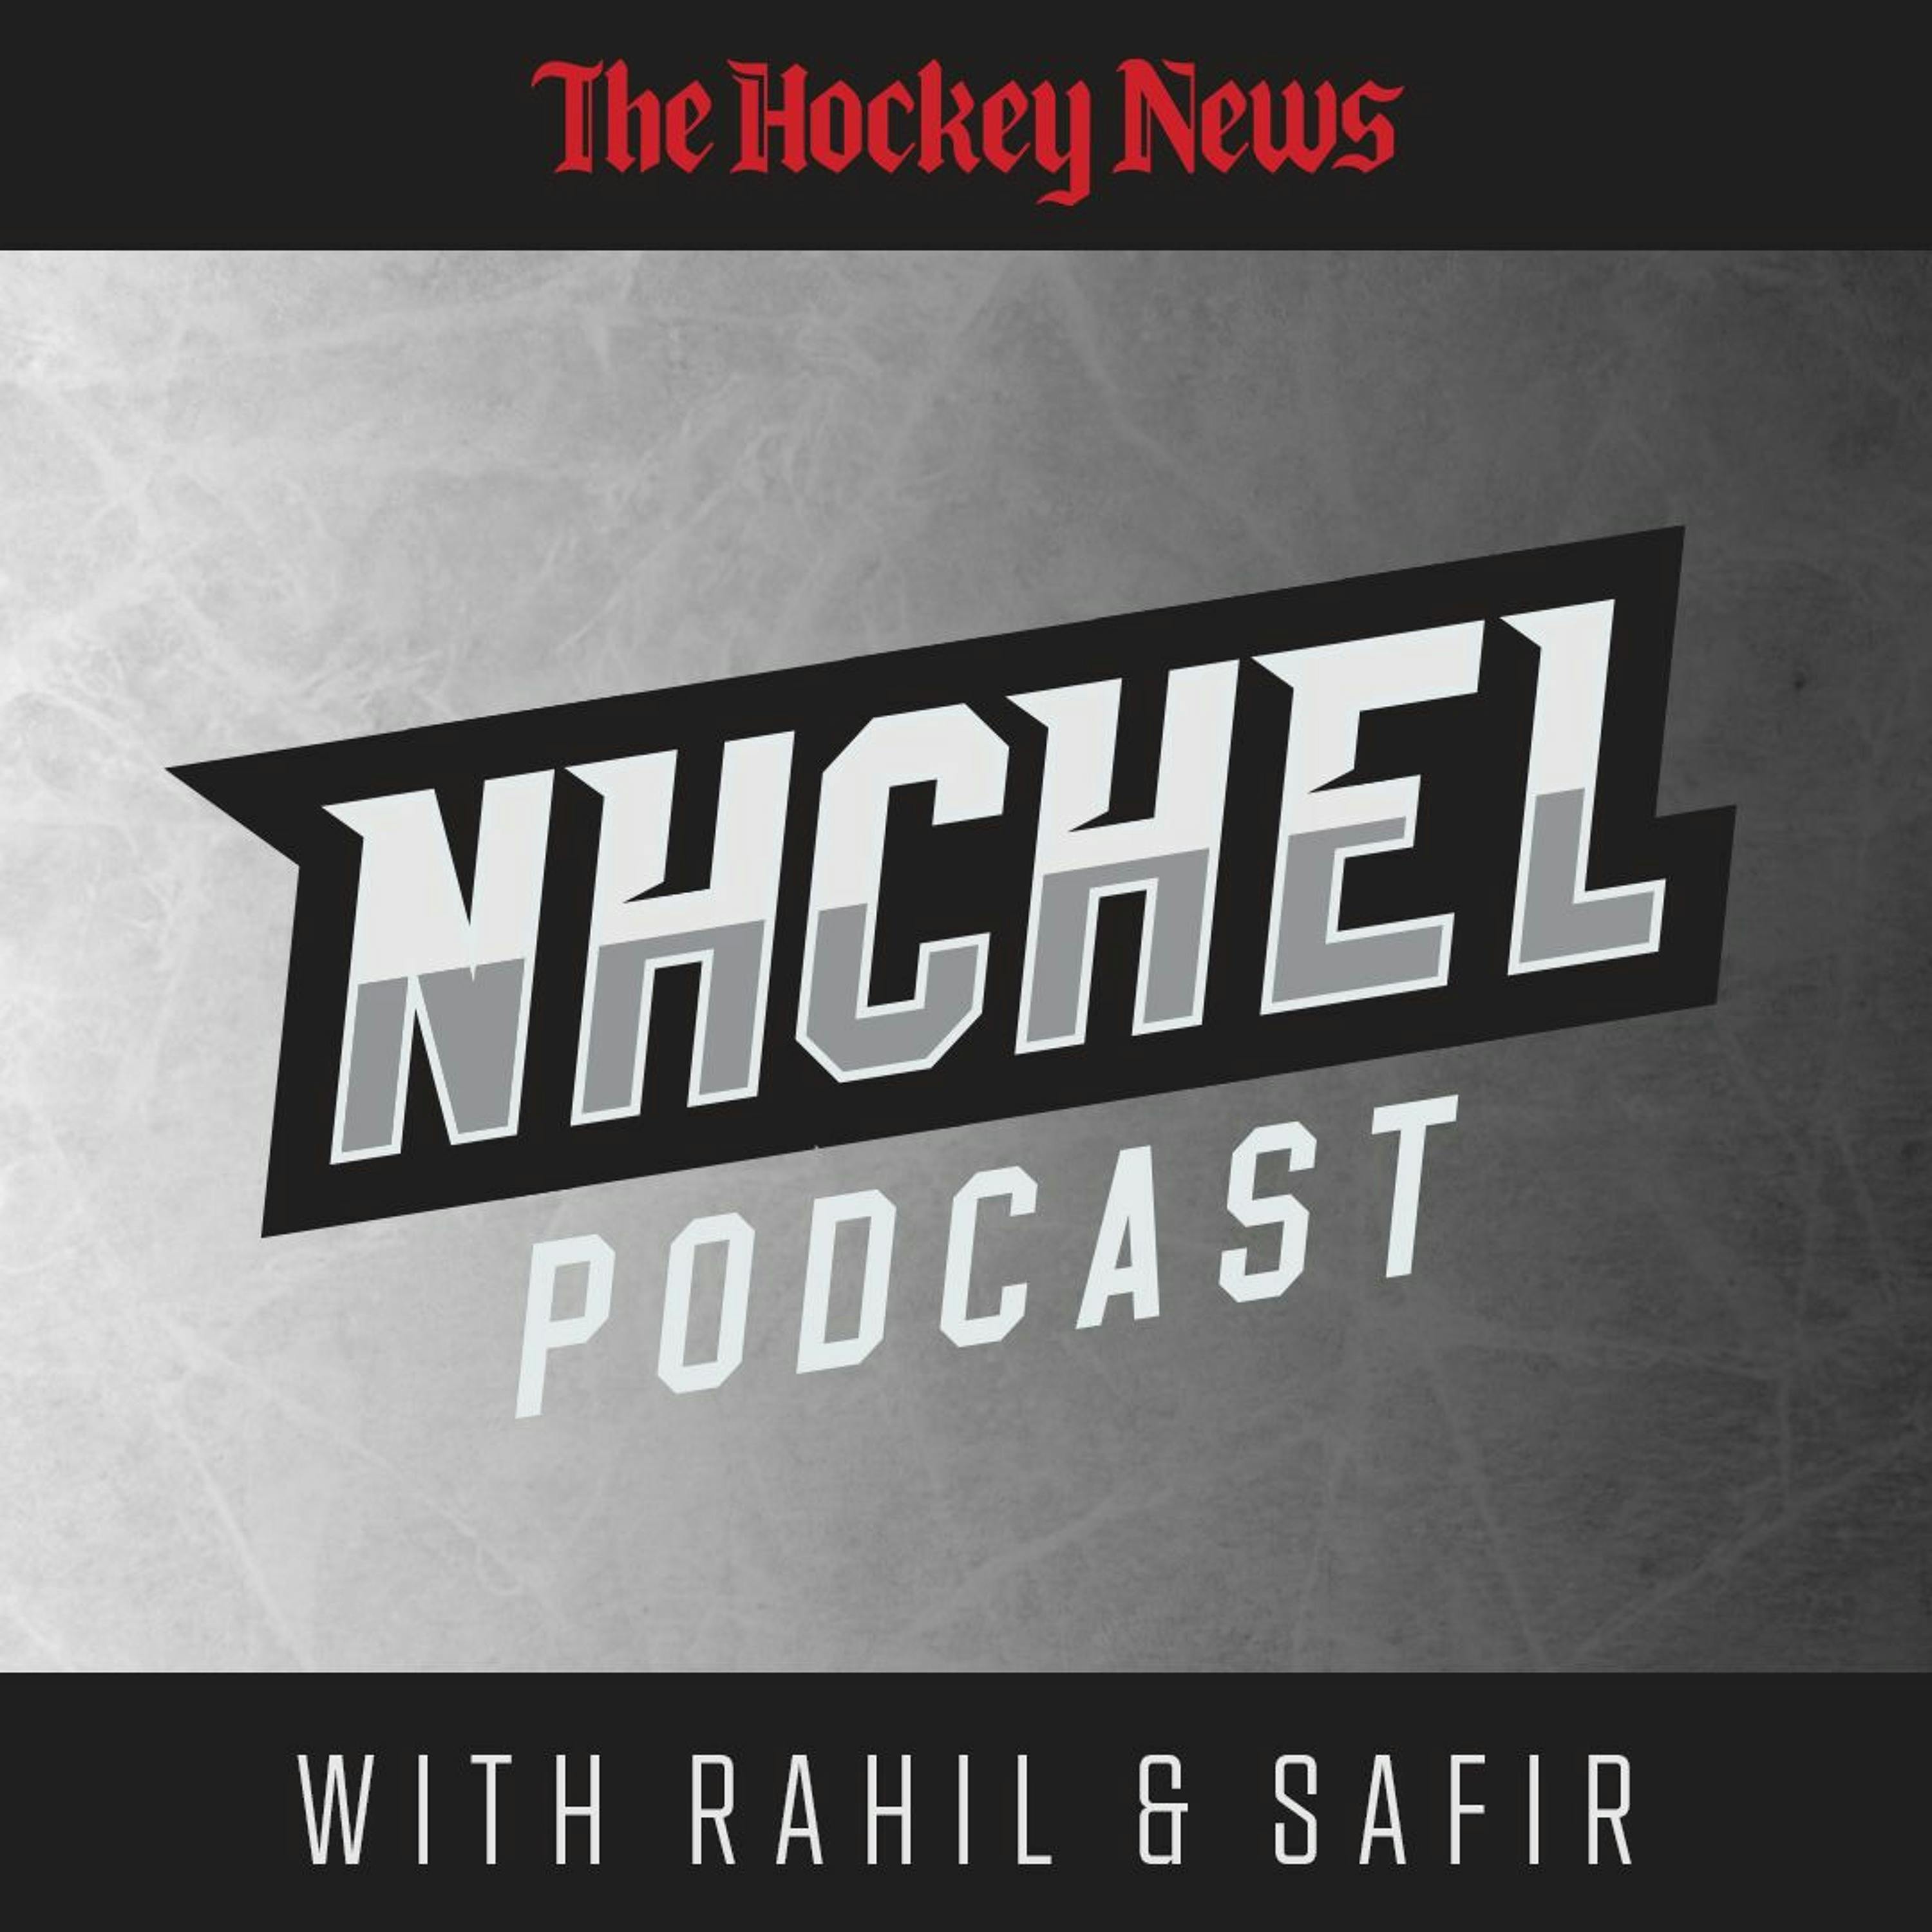 NHChel Podcast: Episode 3 - Calm Before The Storm